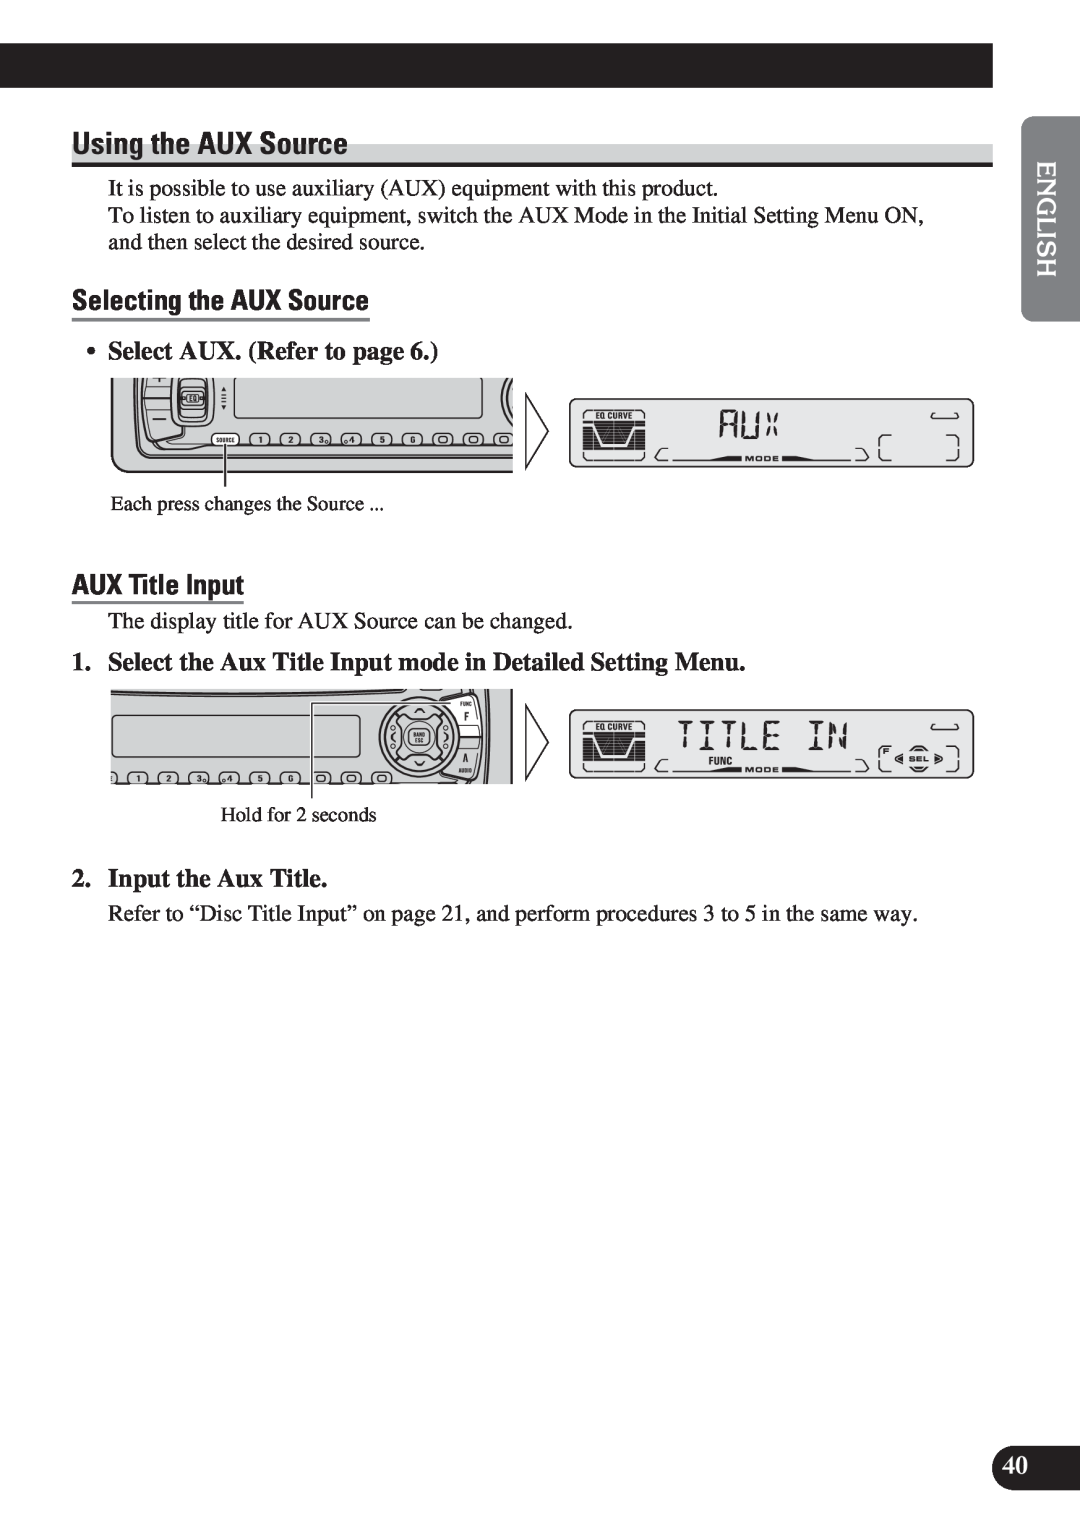 Pioneer DEH-P4150 Using the AUX Source, Selecting the AUX Source, AUX Title Input, Select AUX. Refer to page 